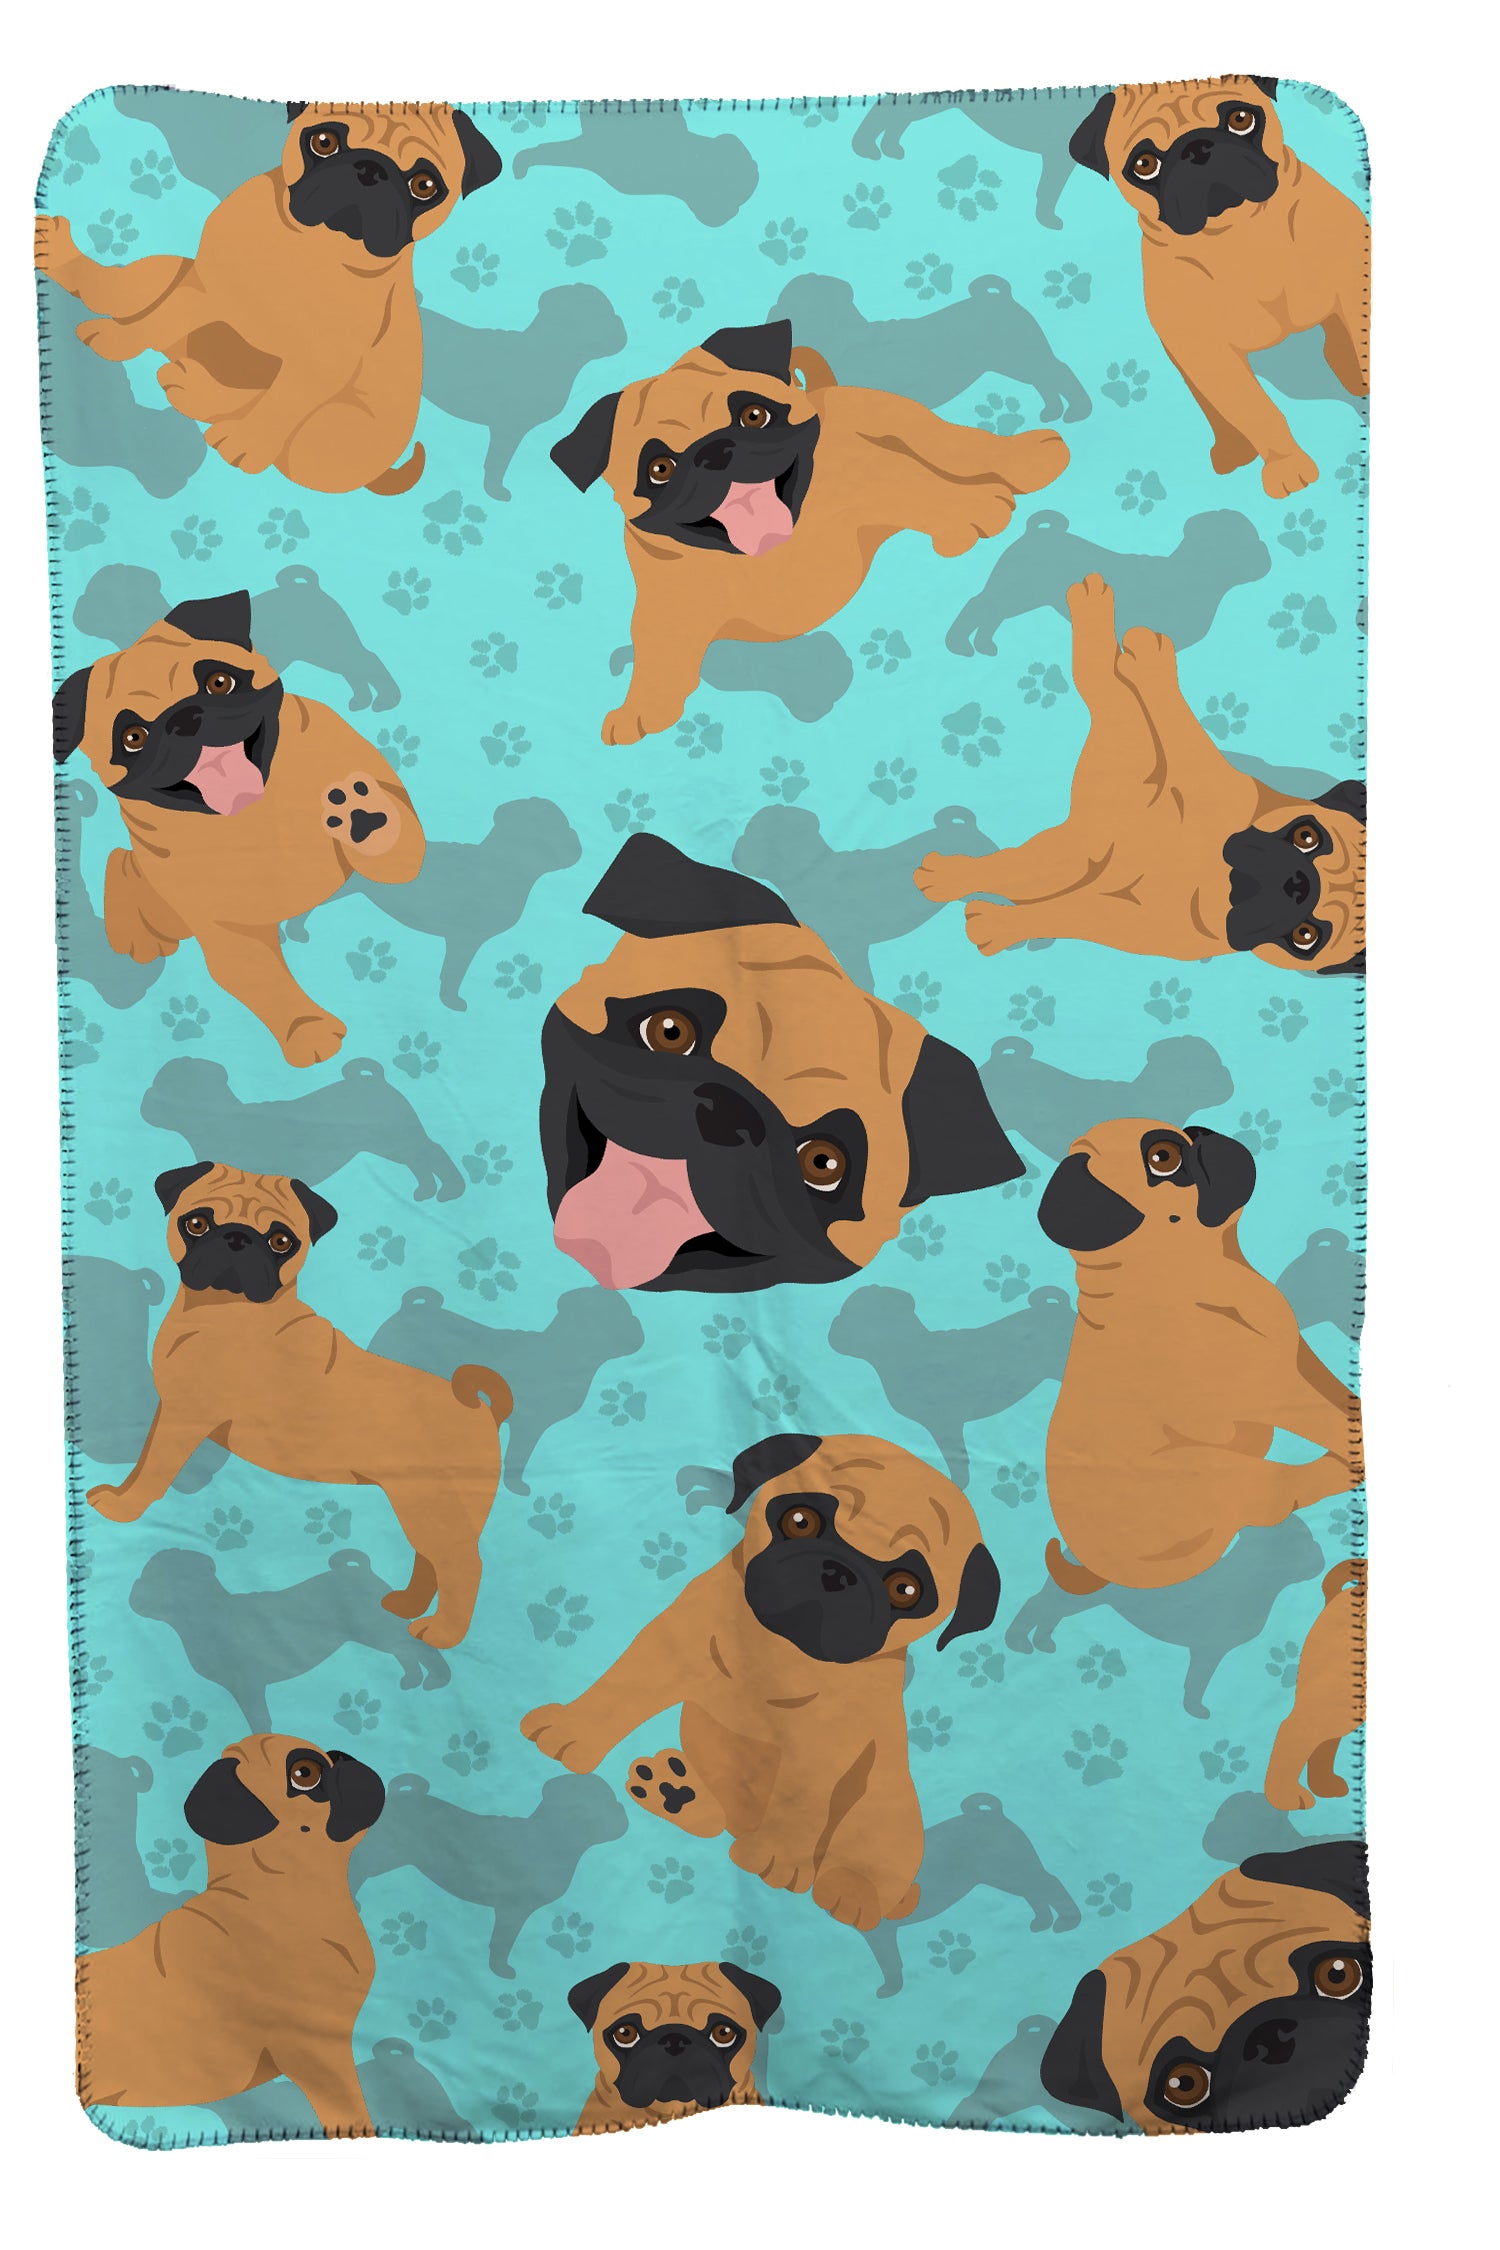 Buy this Apricot Pug Soft Travel Blanket with Bag